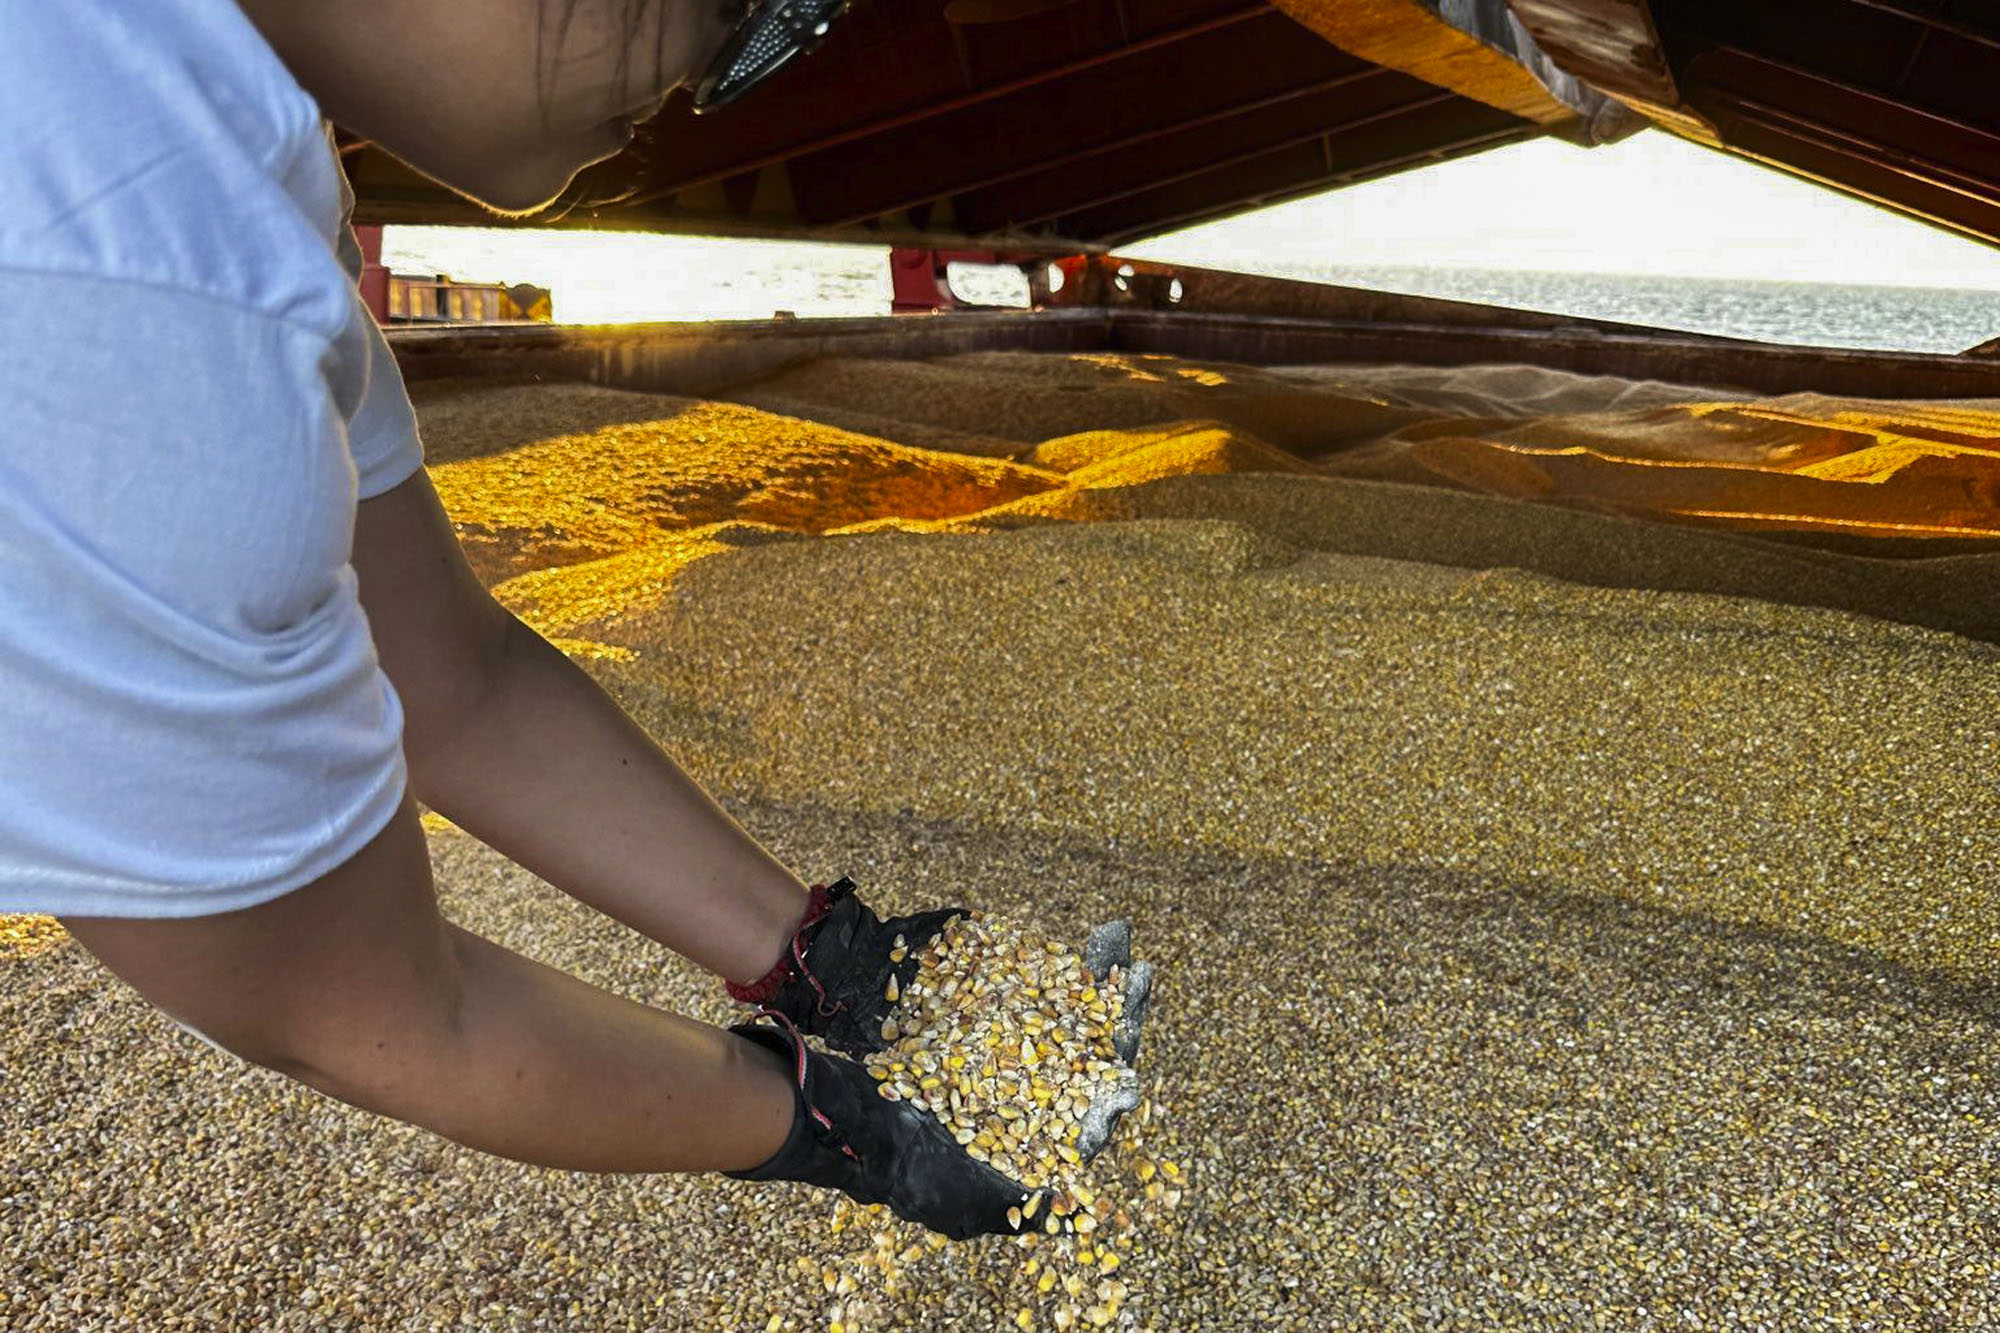 A United Nations official carries out an inspection of grain aboard the cargo ship TQ Samsun, which traveled from Odesa, Ukraine, while the ship lays anchored in the Black Sea near Istanbul, Turkey, on Monday, July 17. 